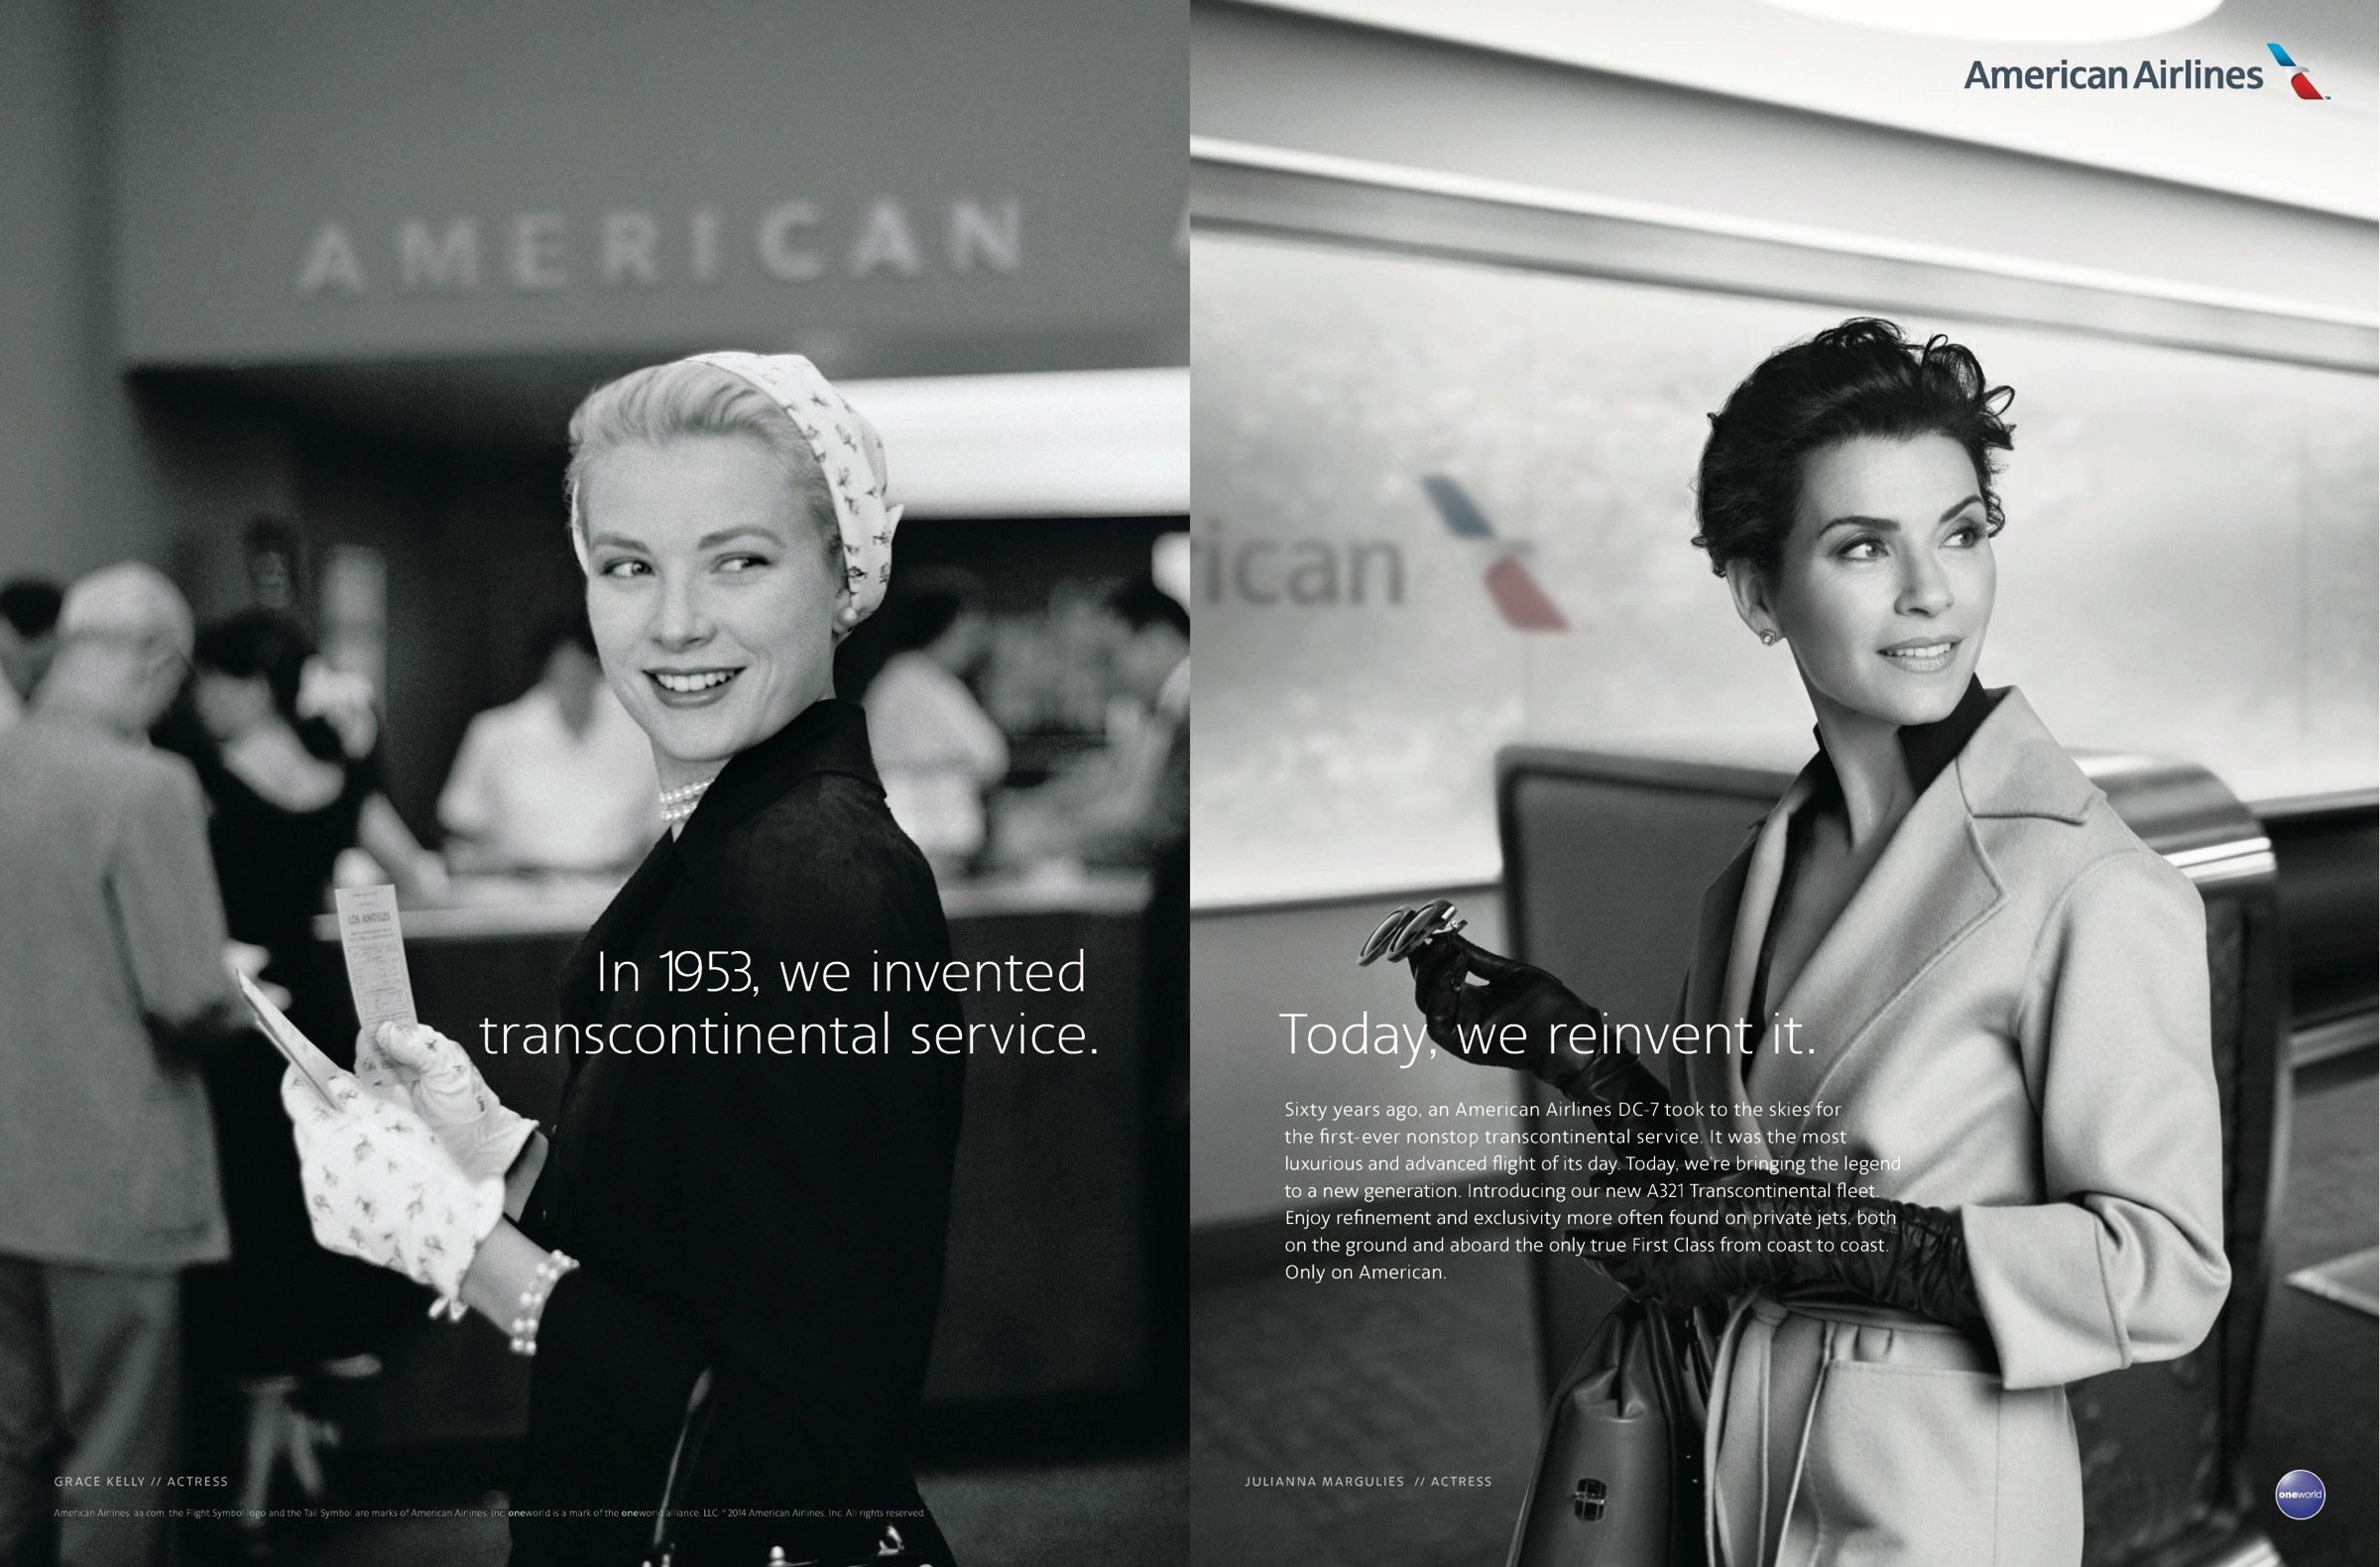 American Airlines – The Legend is back